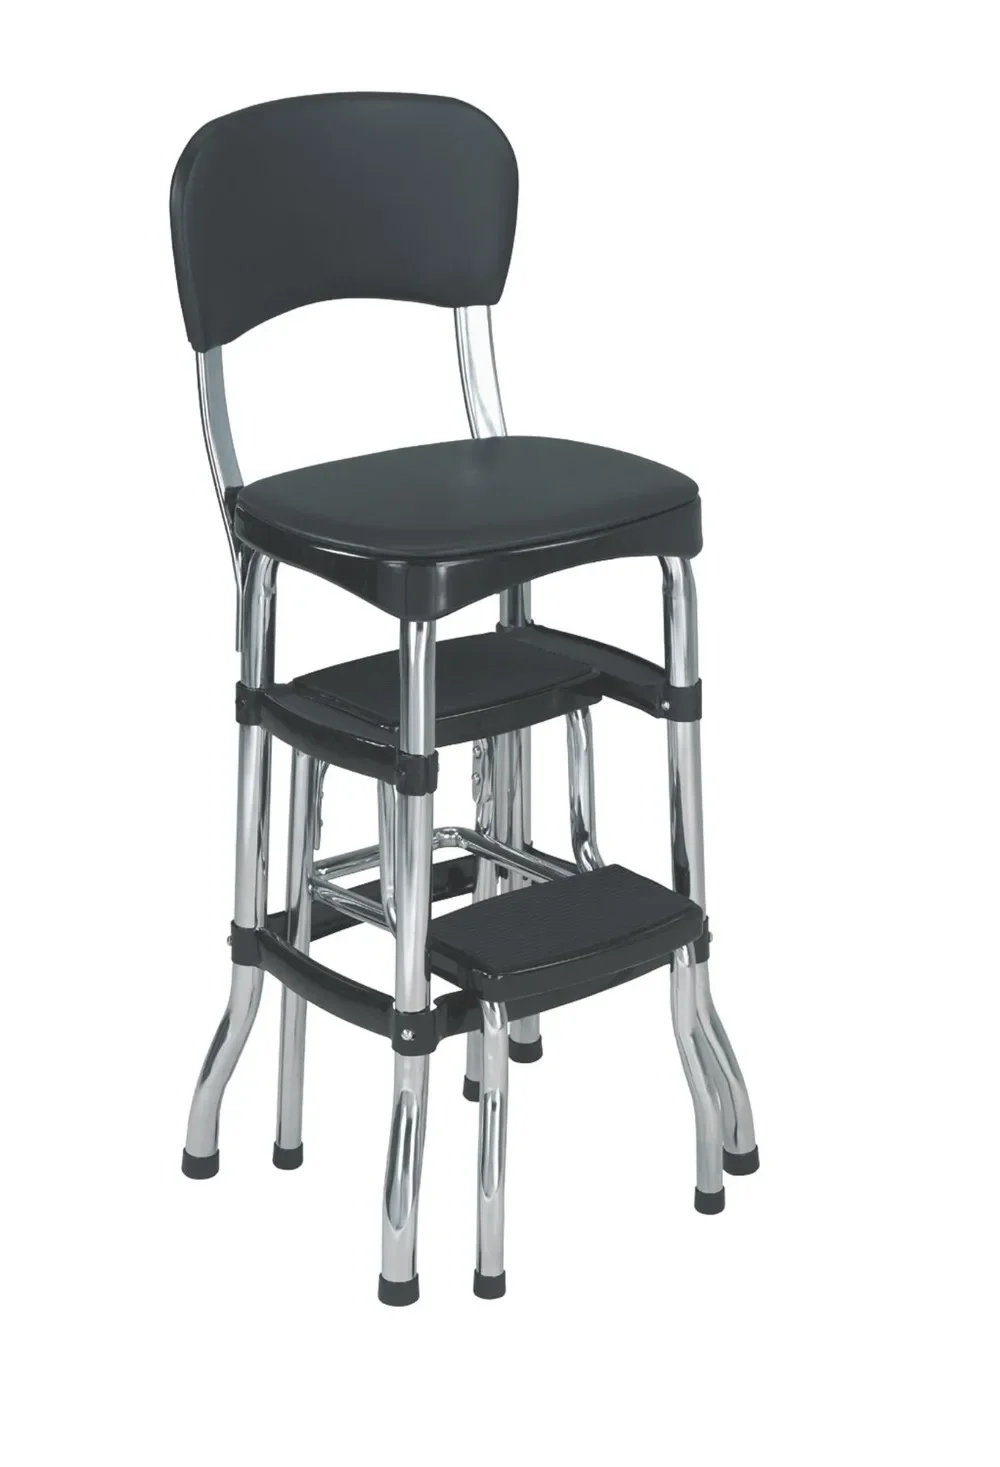 

Counter Stools Stylaire Retro Chair + Step Stool with Sliding Steps, Black Durable